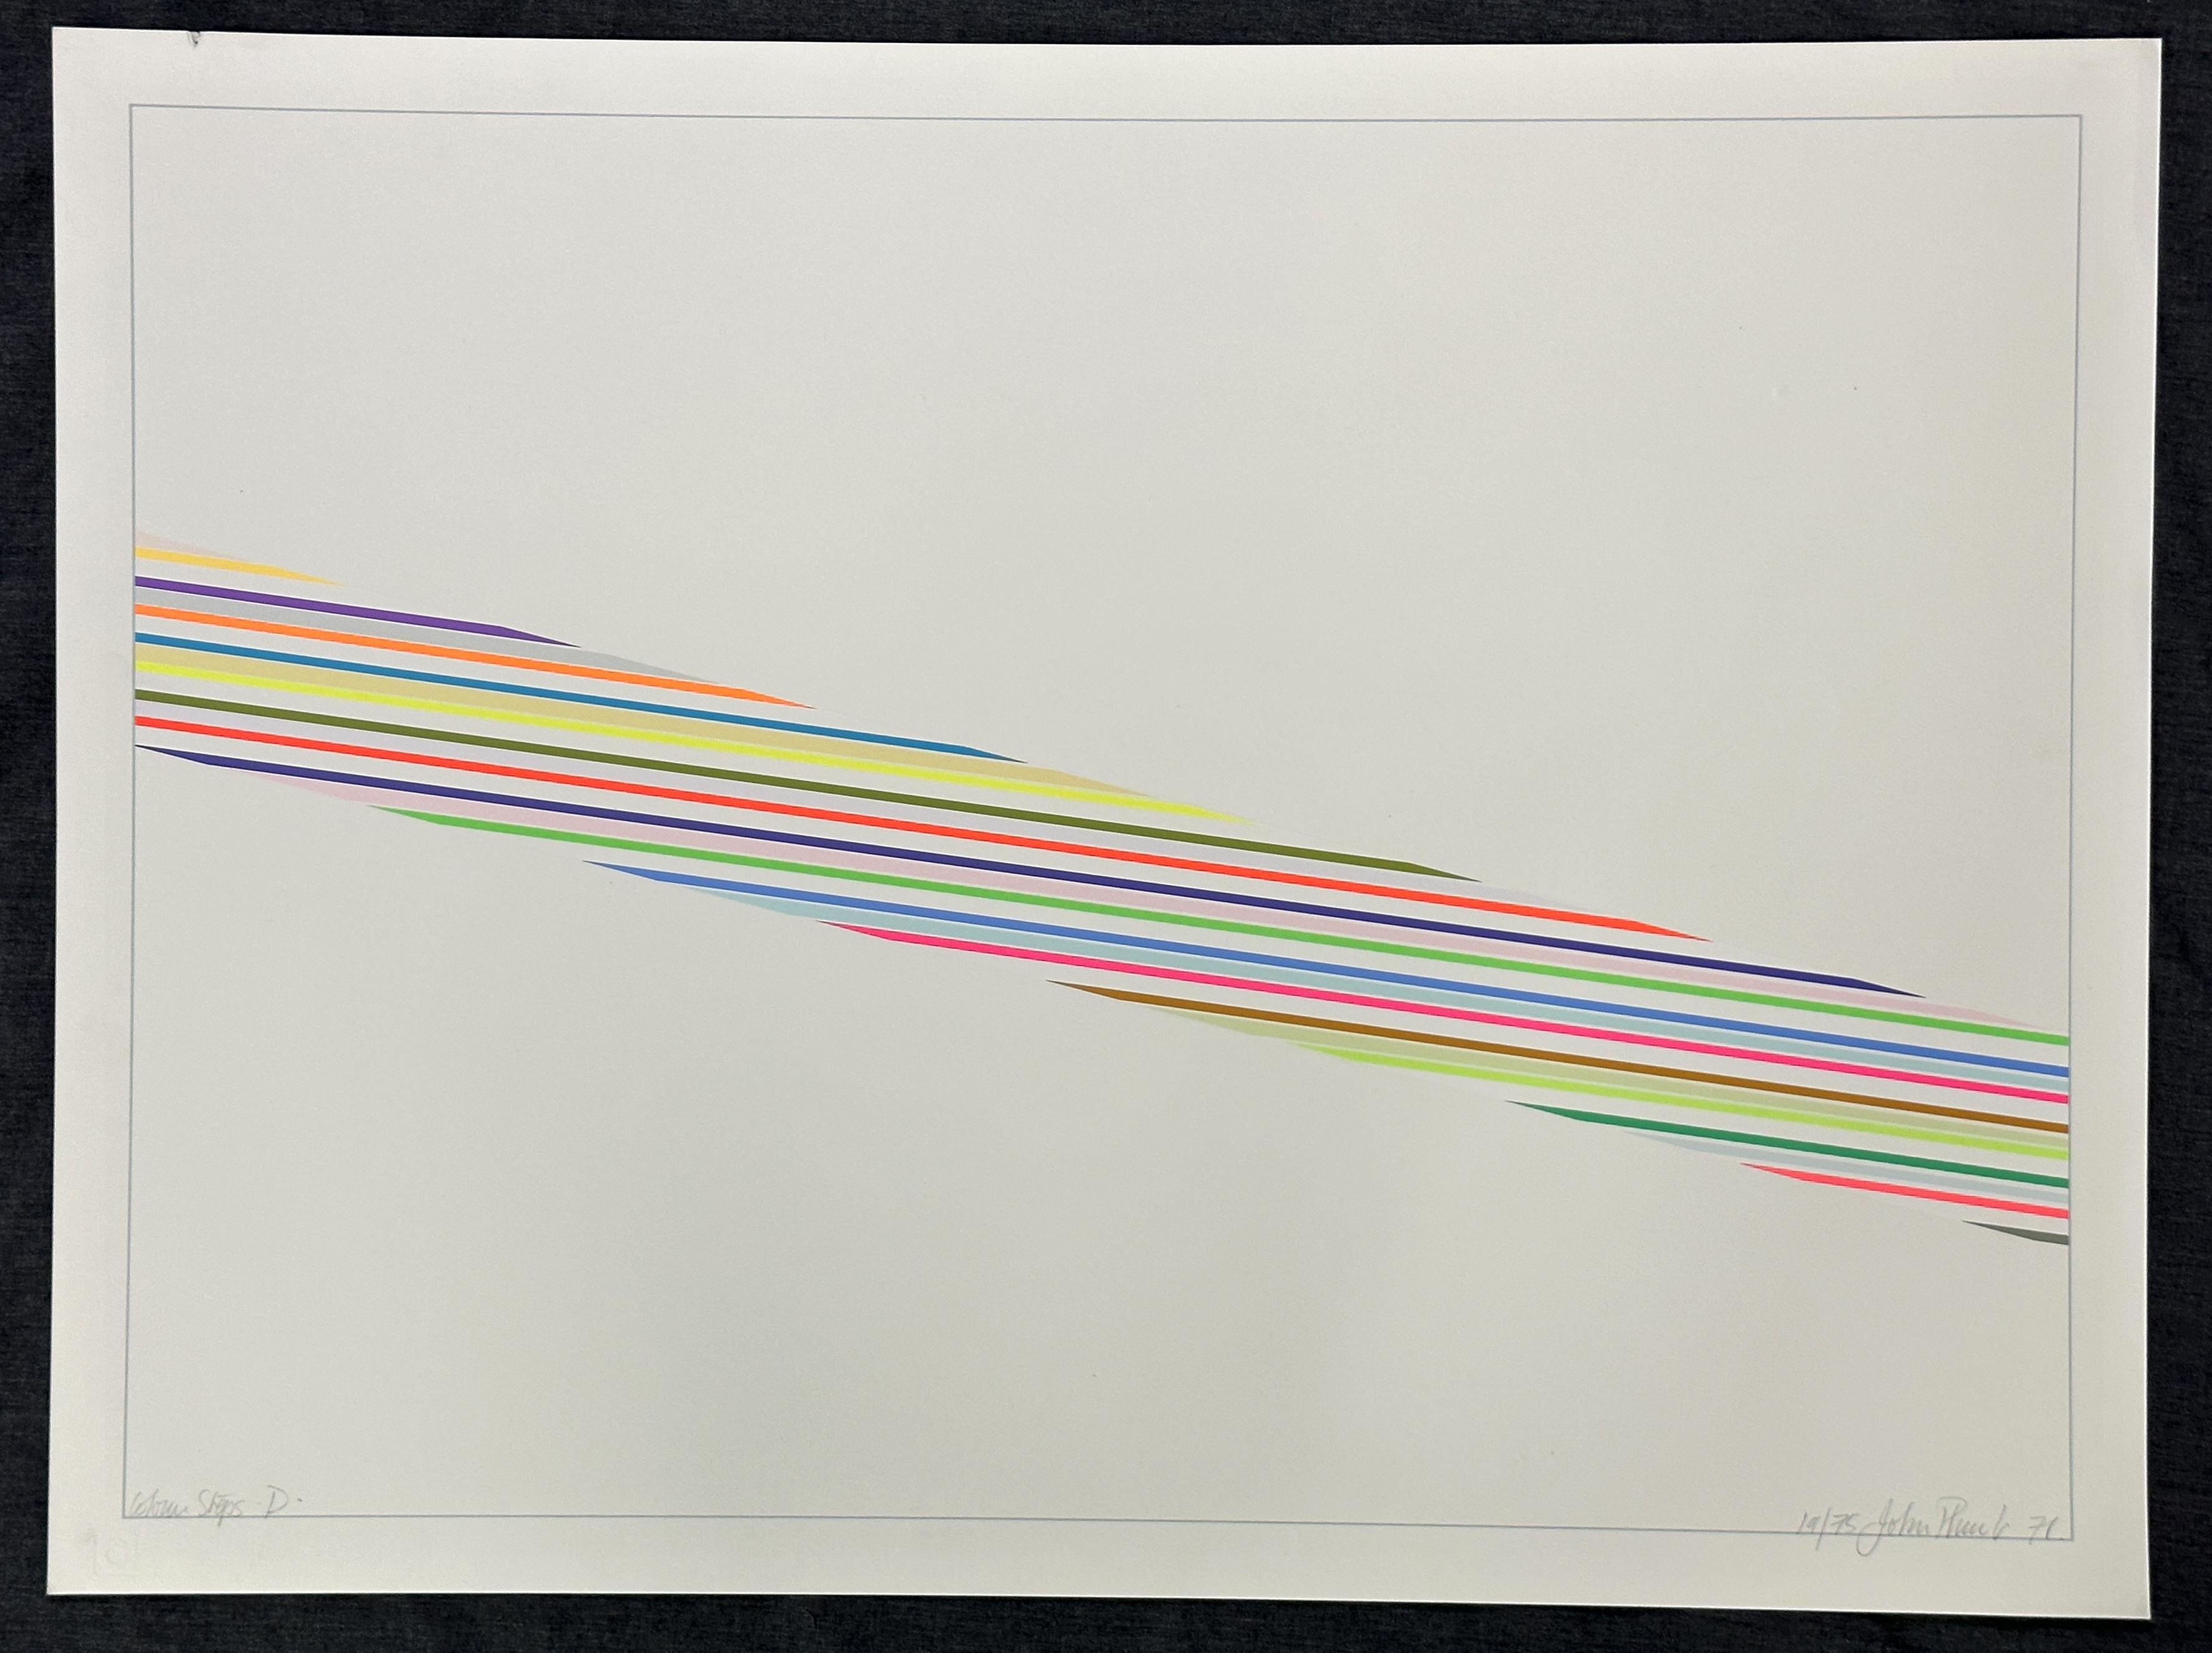 John Plumb
'Colour Step D' 
1971
Medium Type: Screen Print
Size-Width  Size-Height: 22'' x 30''
Signed  
Edition Size: Signed in pencil, titled and marked  19/75

John Plumb is one of the leading abstract painters of our time. His work can be found